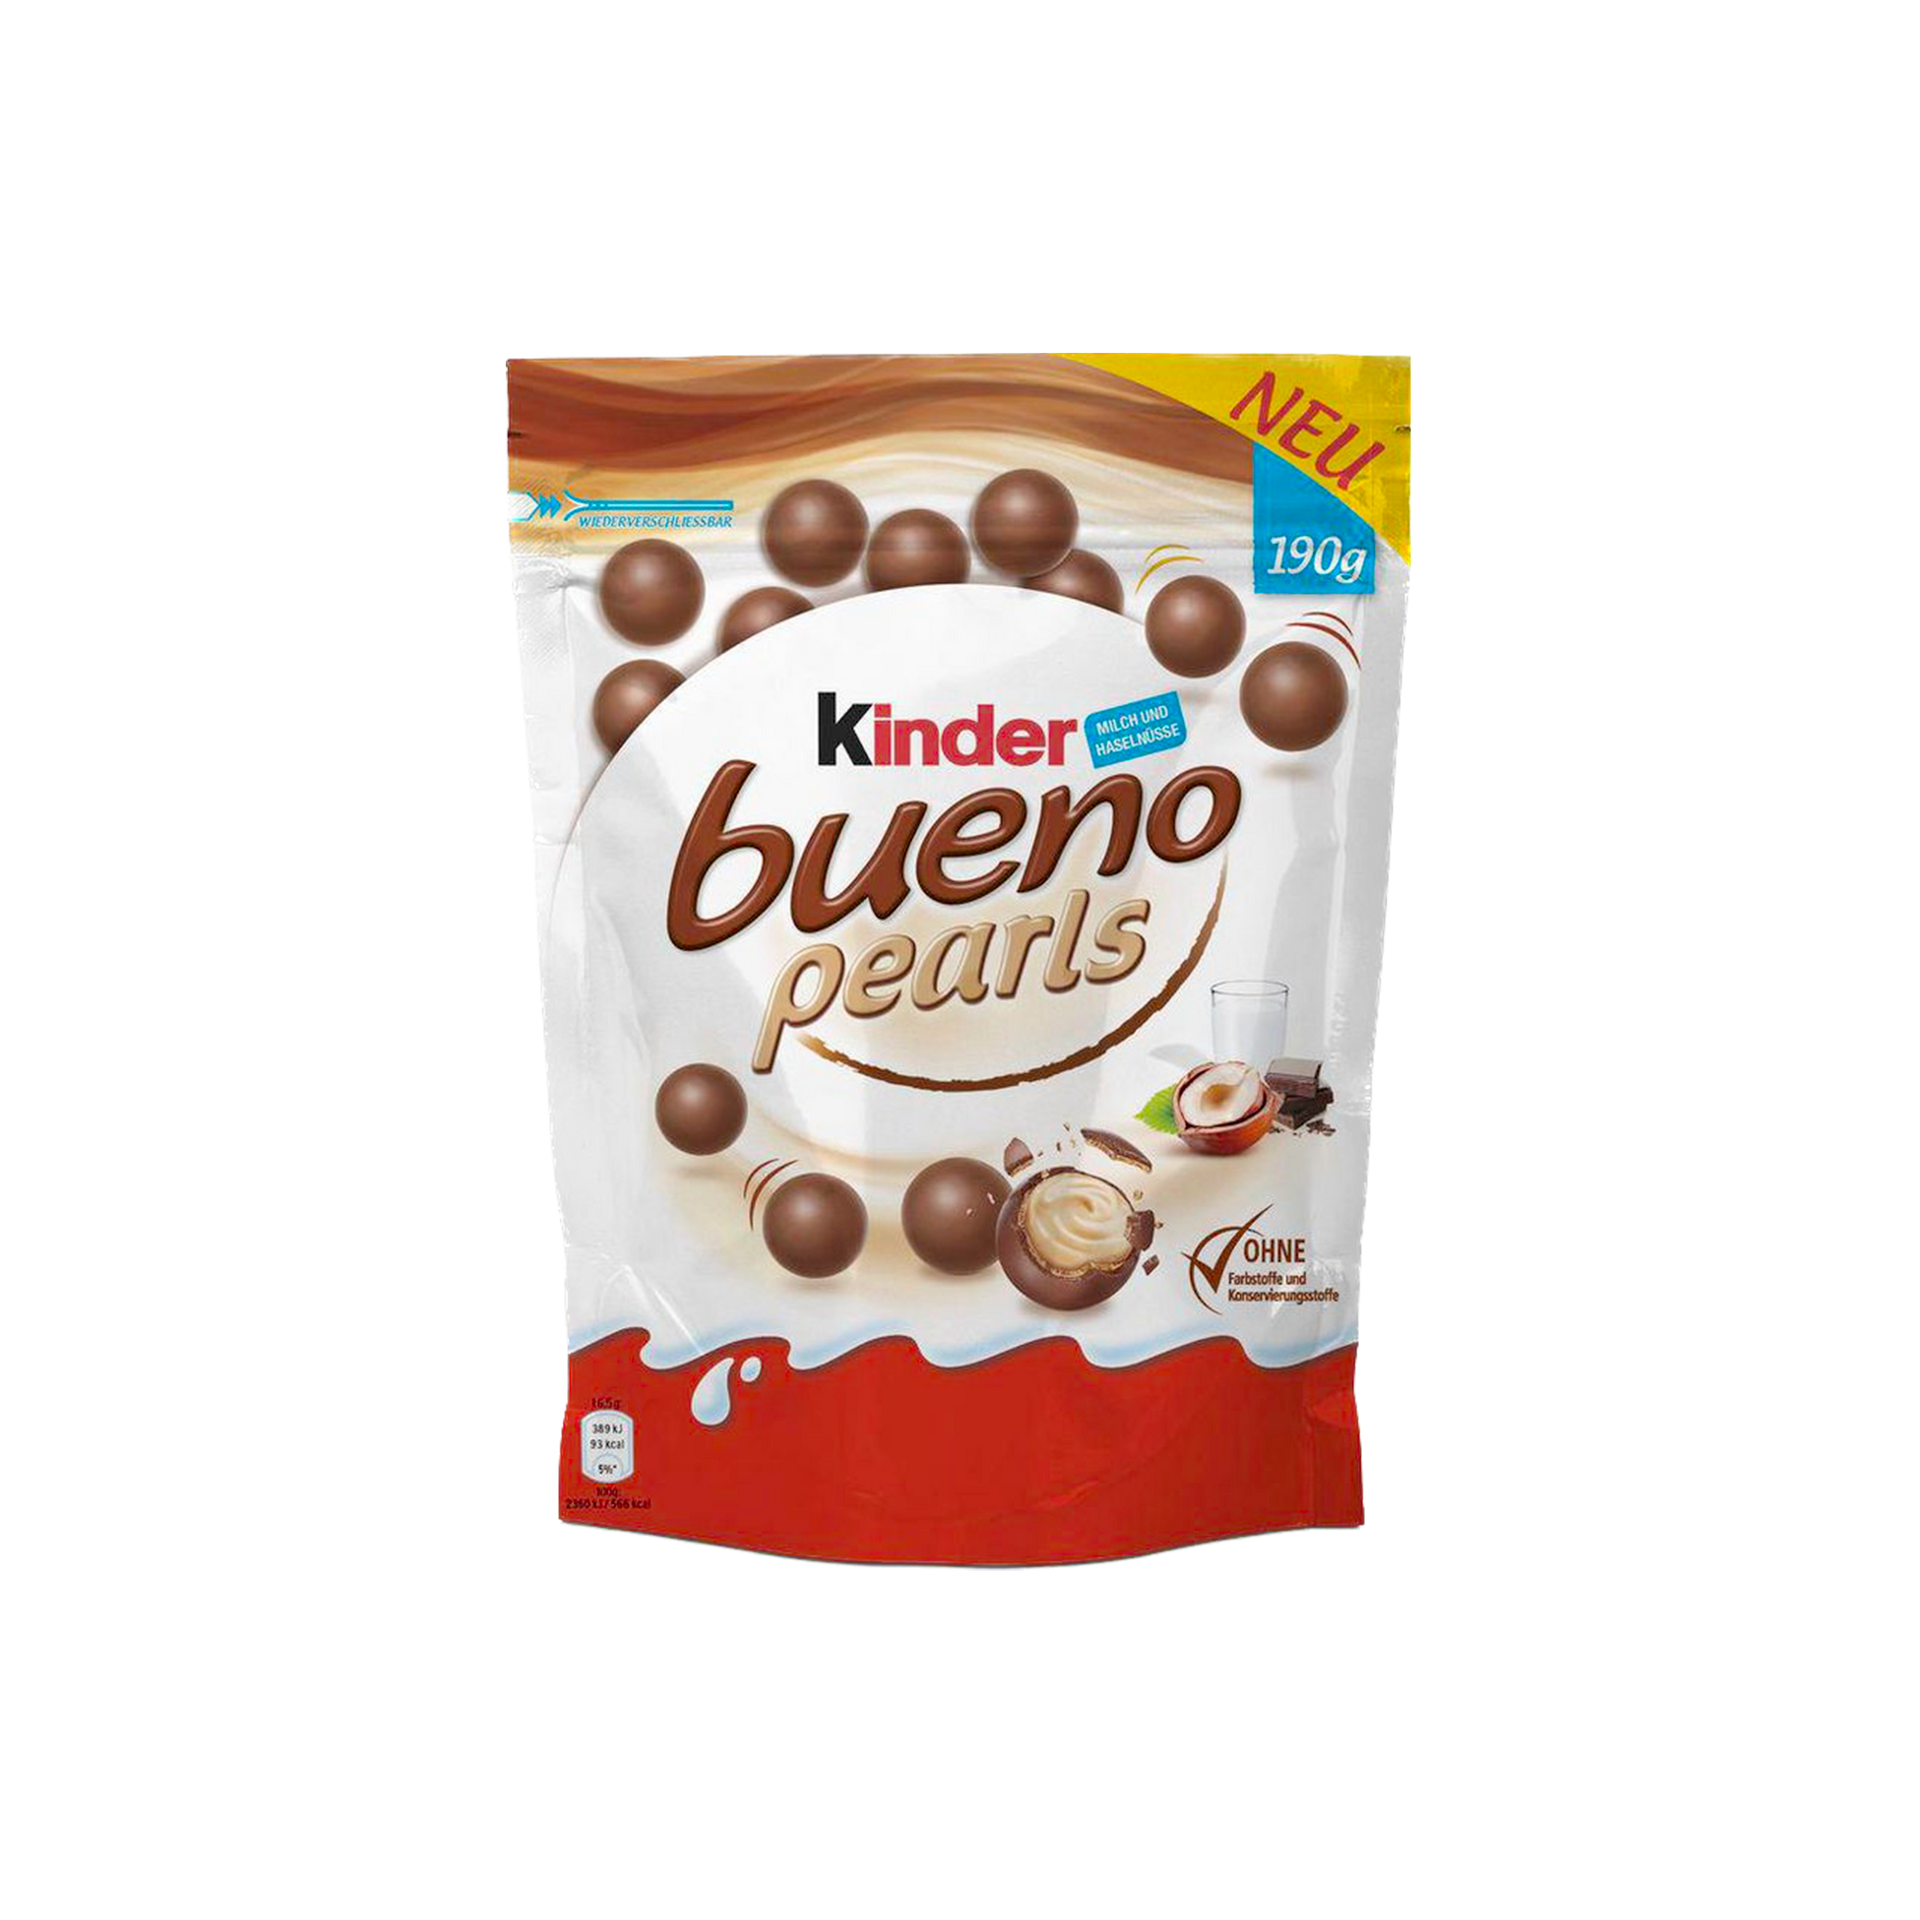 Rebel Dublin on X: Kinder Bueno Pearls Exist And They Look